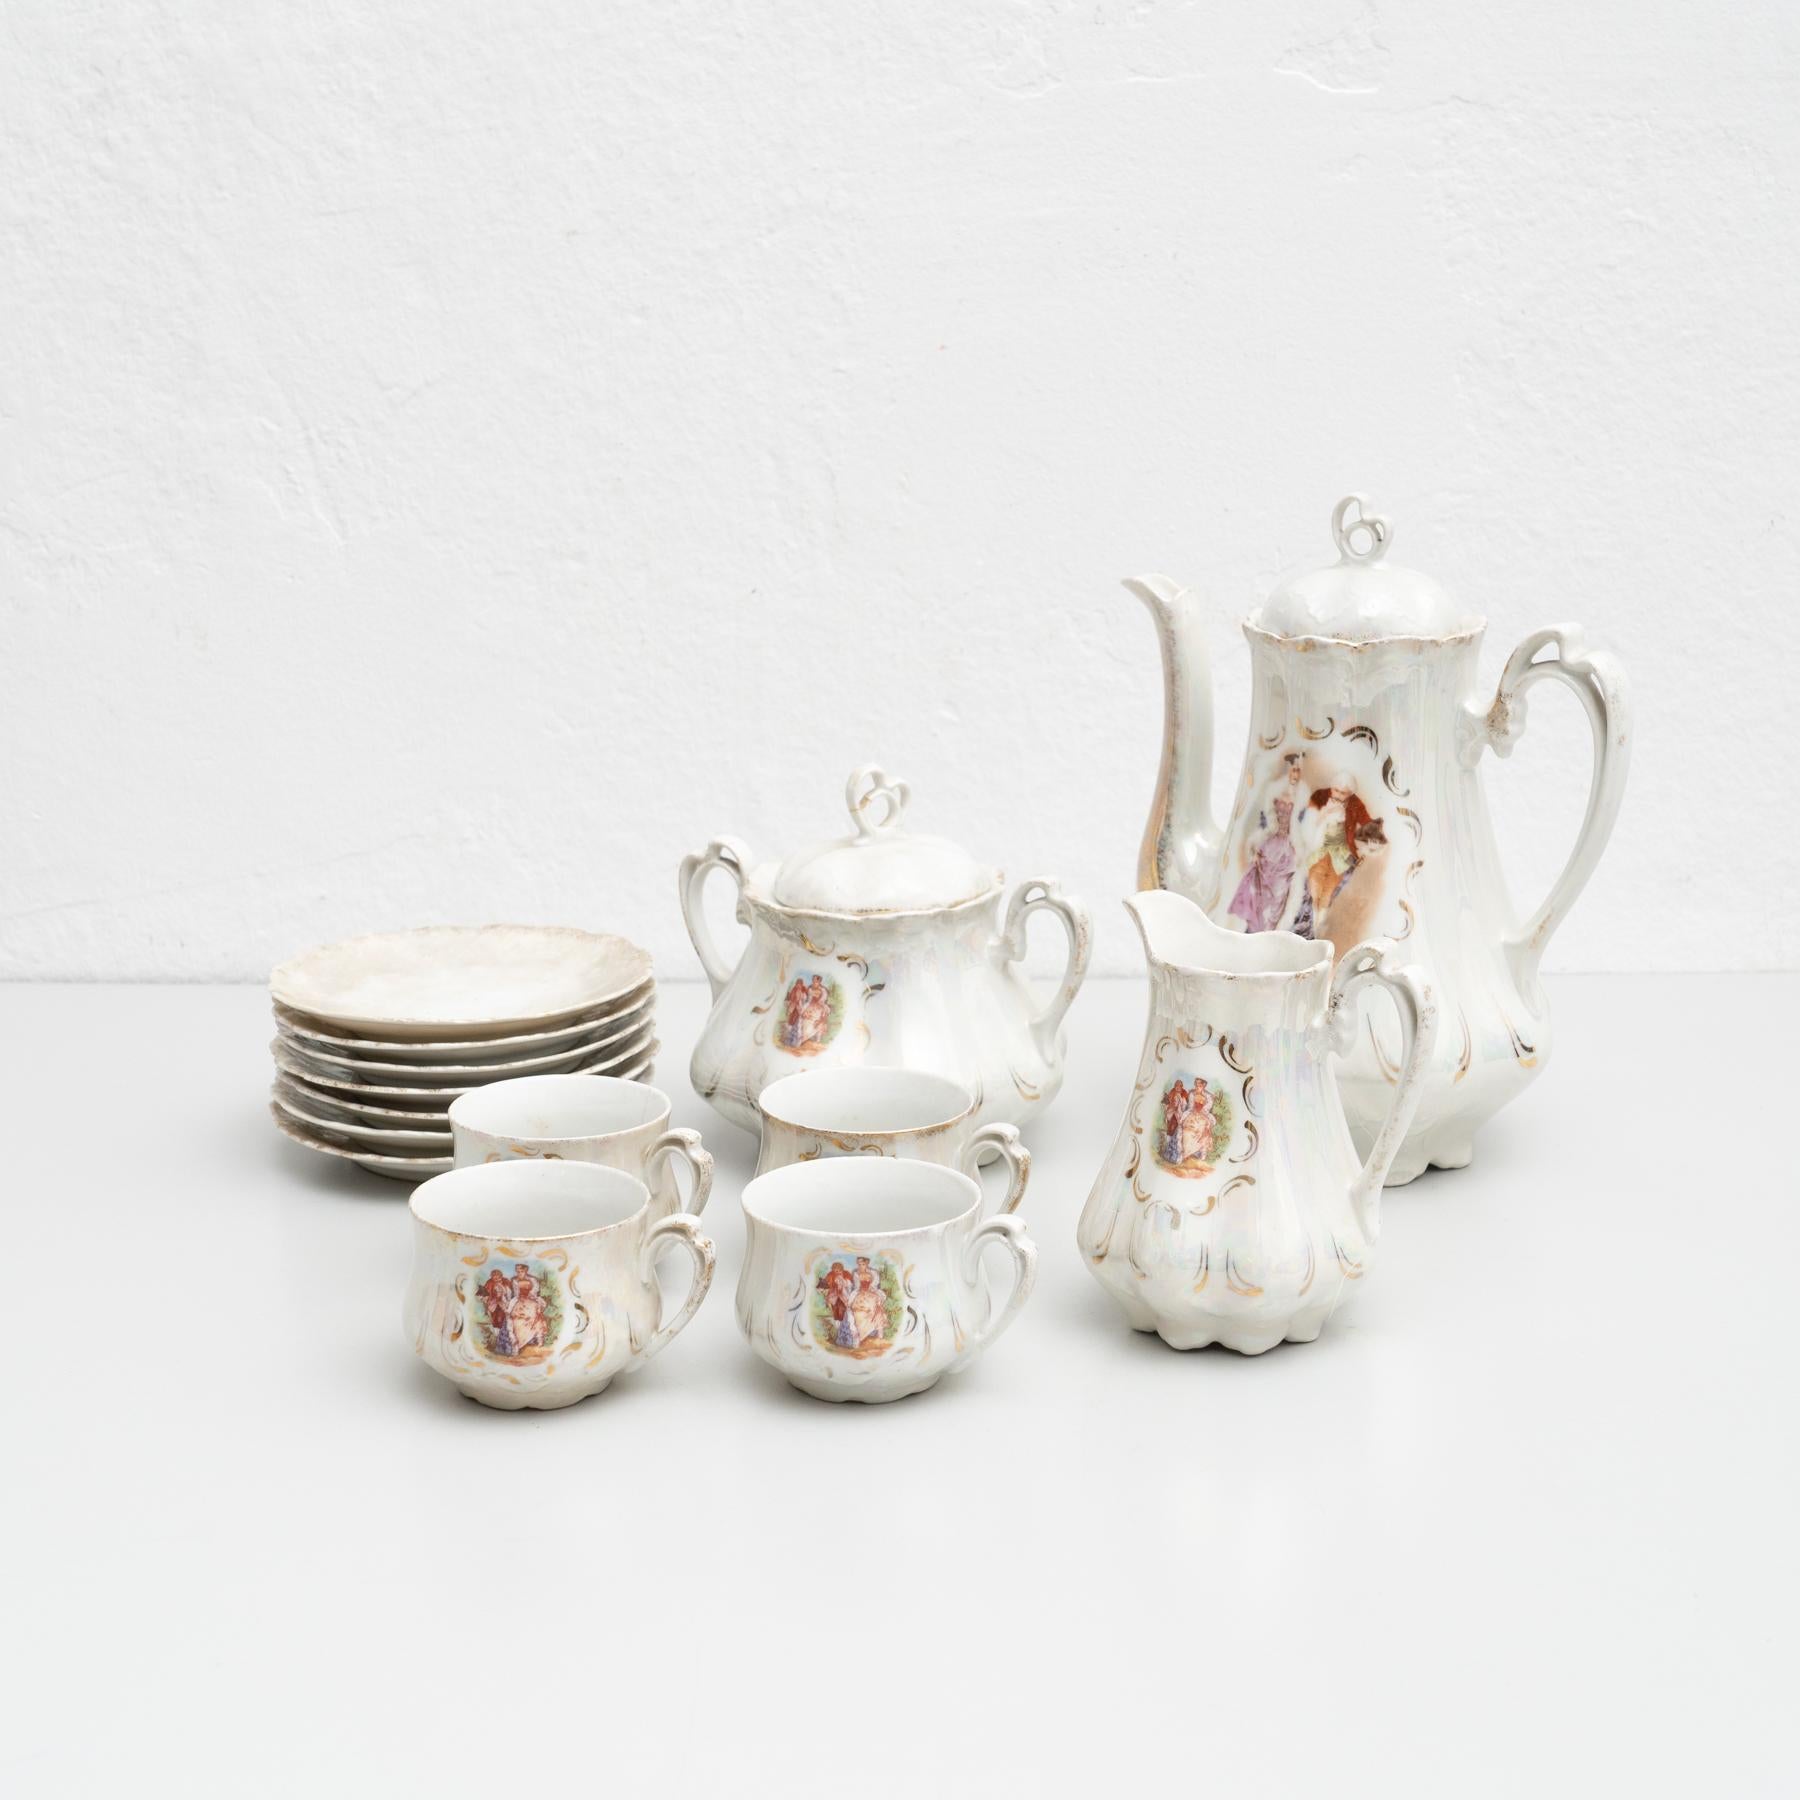 Antique tea set consistent of 14 pieces including coffee plates, coffee cups and pots. 

Hand painted in the traditional French style.

Made by an unknown manufacturer in France.

In original condition, with minor wear consistent of age and